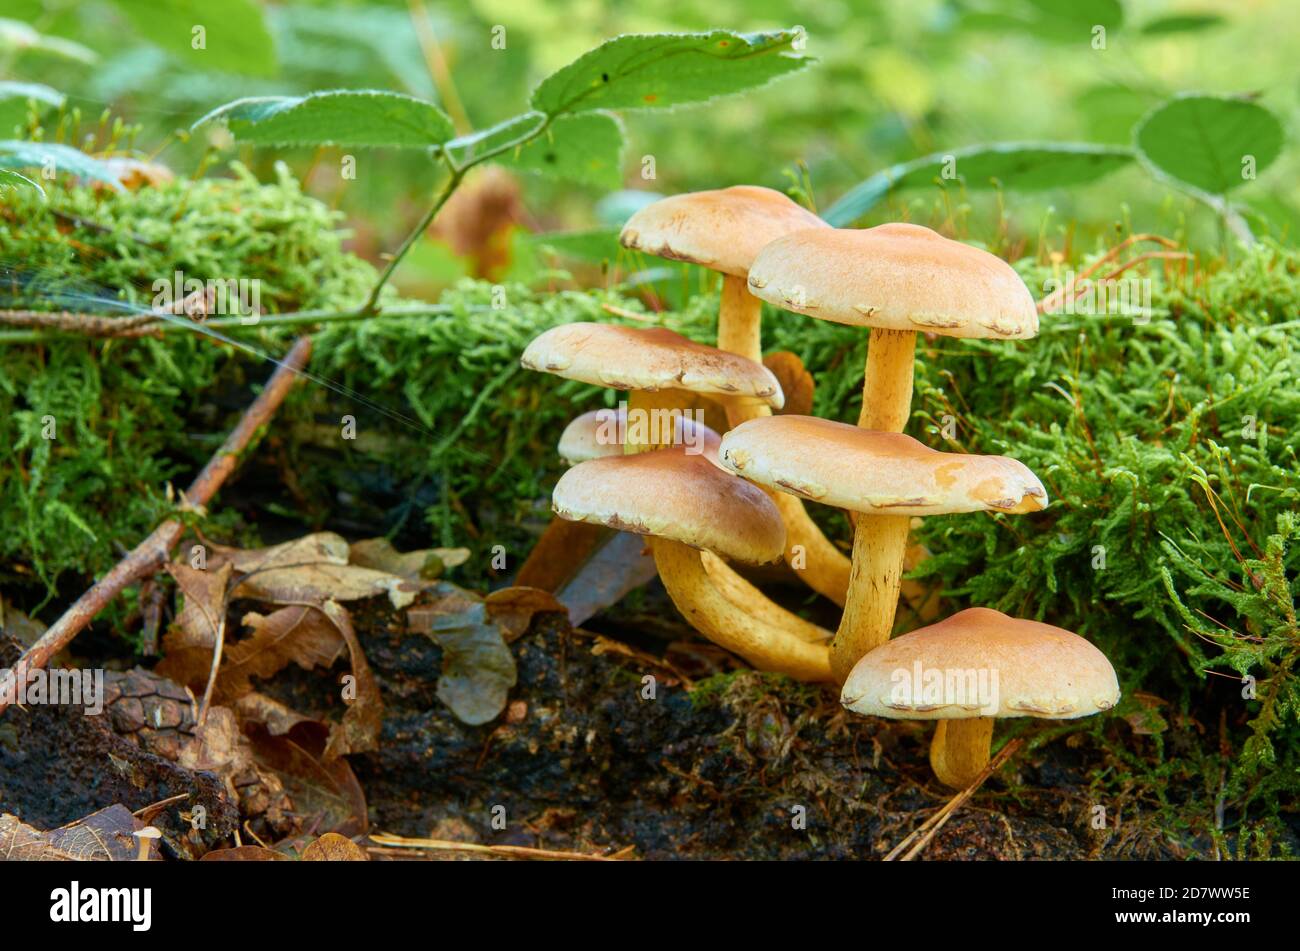 Yellow mushrooms in a hat grow on a tree stump Stock Photo